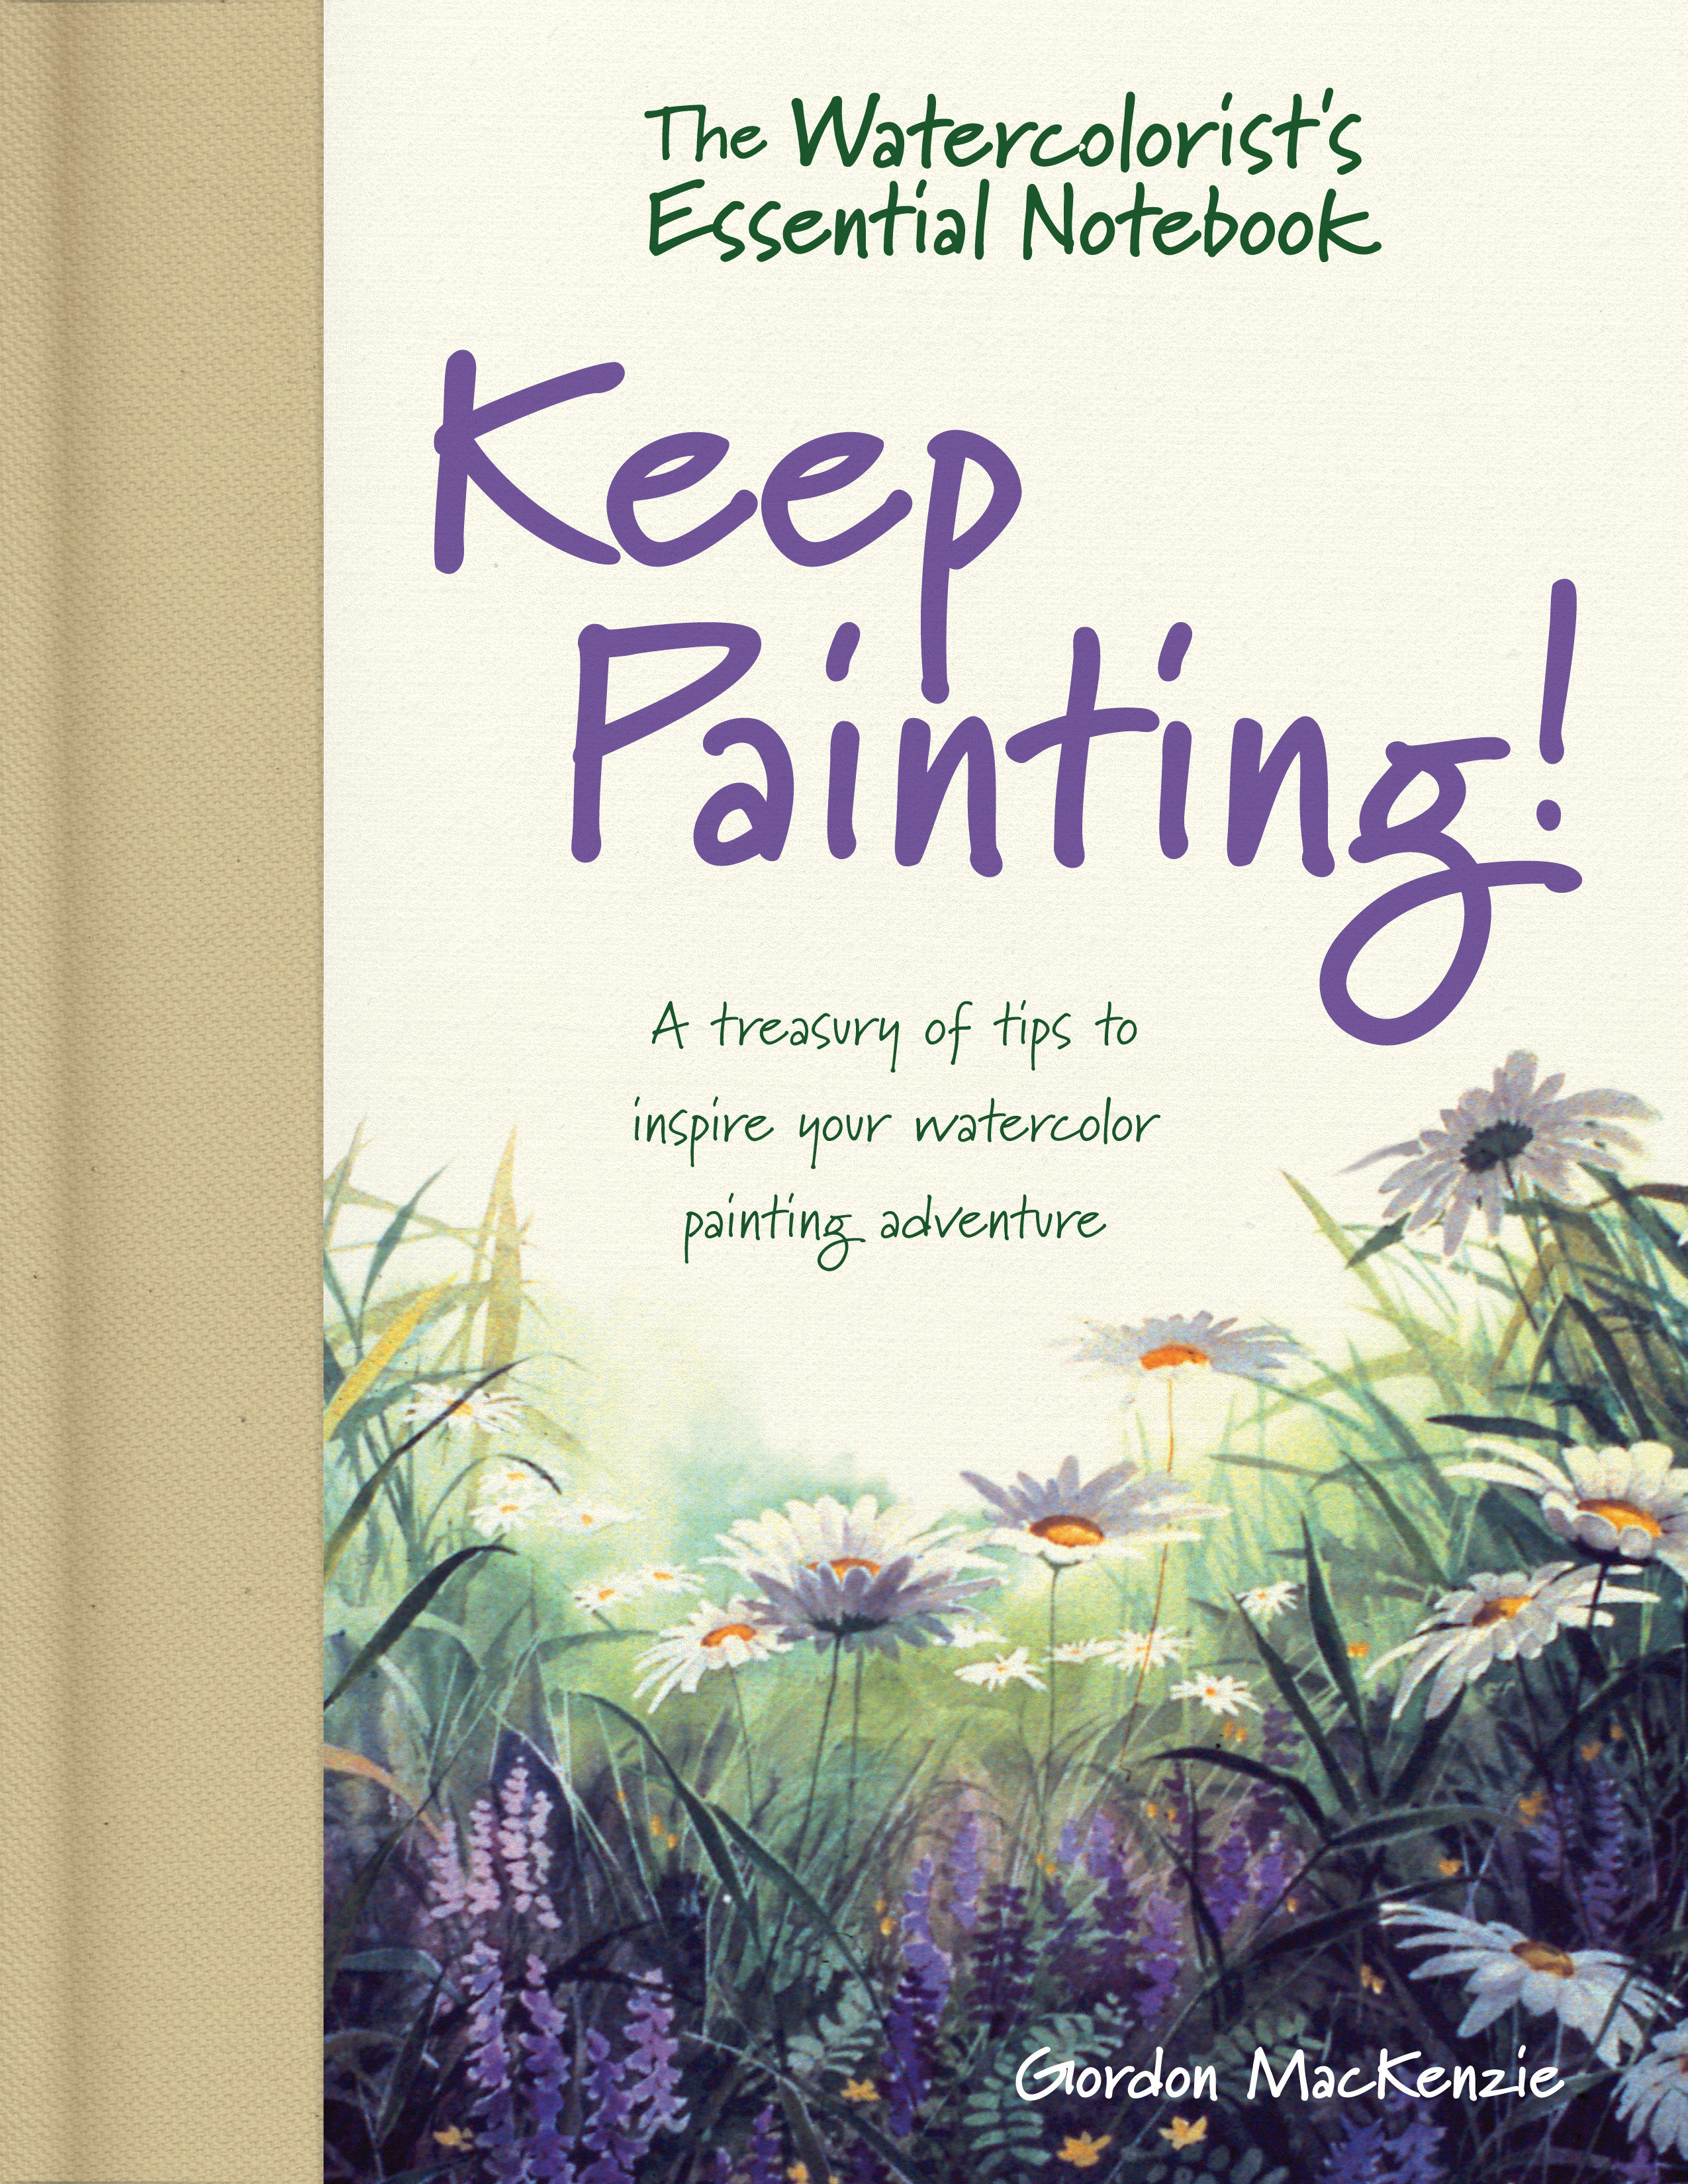 The Watercolorist'S Essential Notebook - Keep Painting! (Hardcover Book)